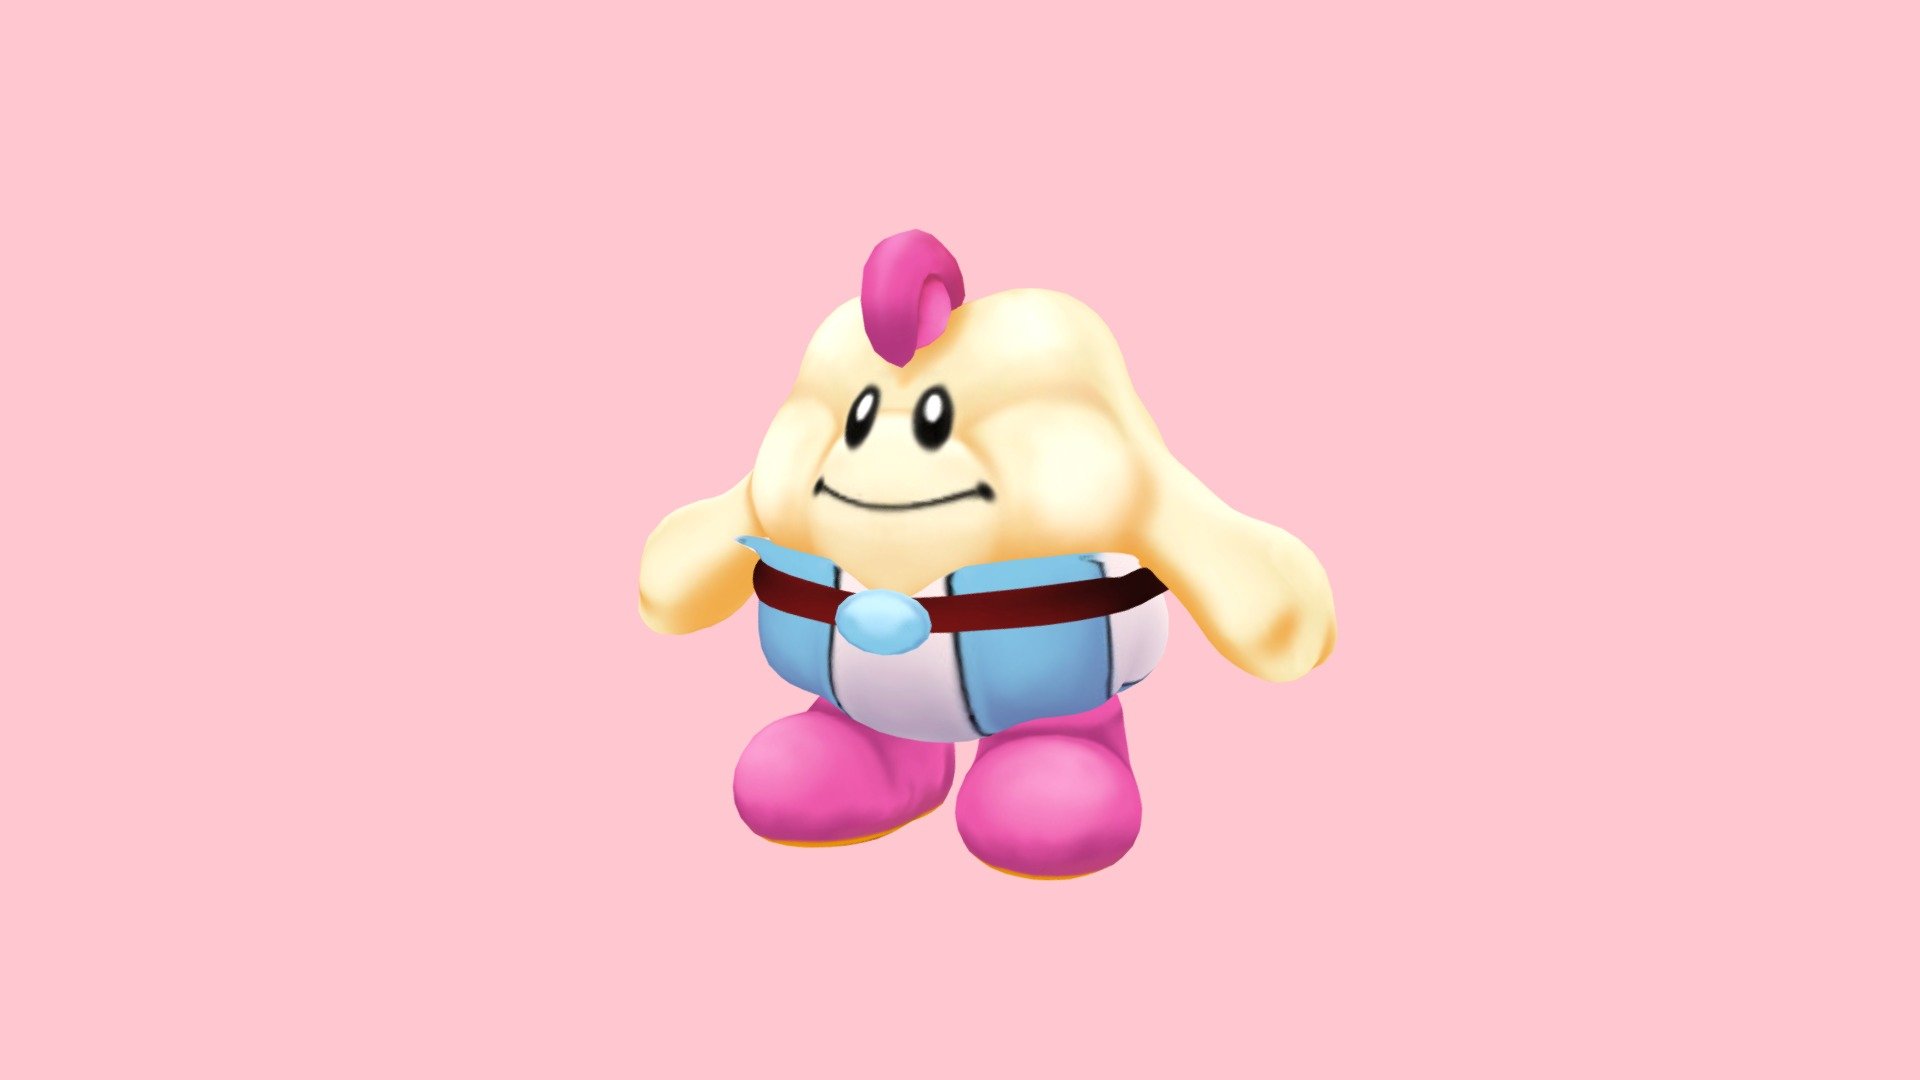 Here's a quick model I made of Mallow from Super Mario RPG!!

I used ZBrush and XNormal to make it. It was a nice handpainting exercise&hellip;! - Mallow - Super Mario RPG - 3D model by maurimo 3d model